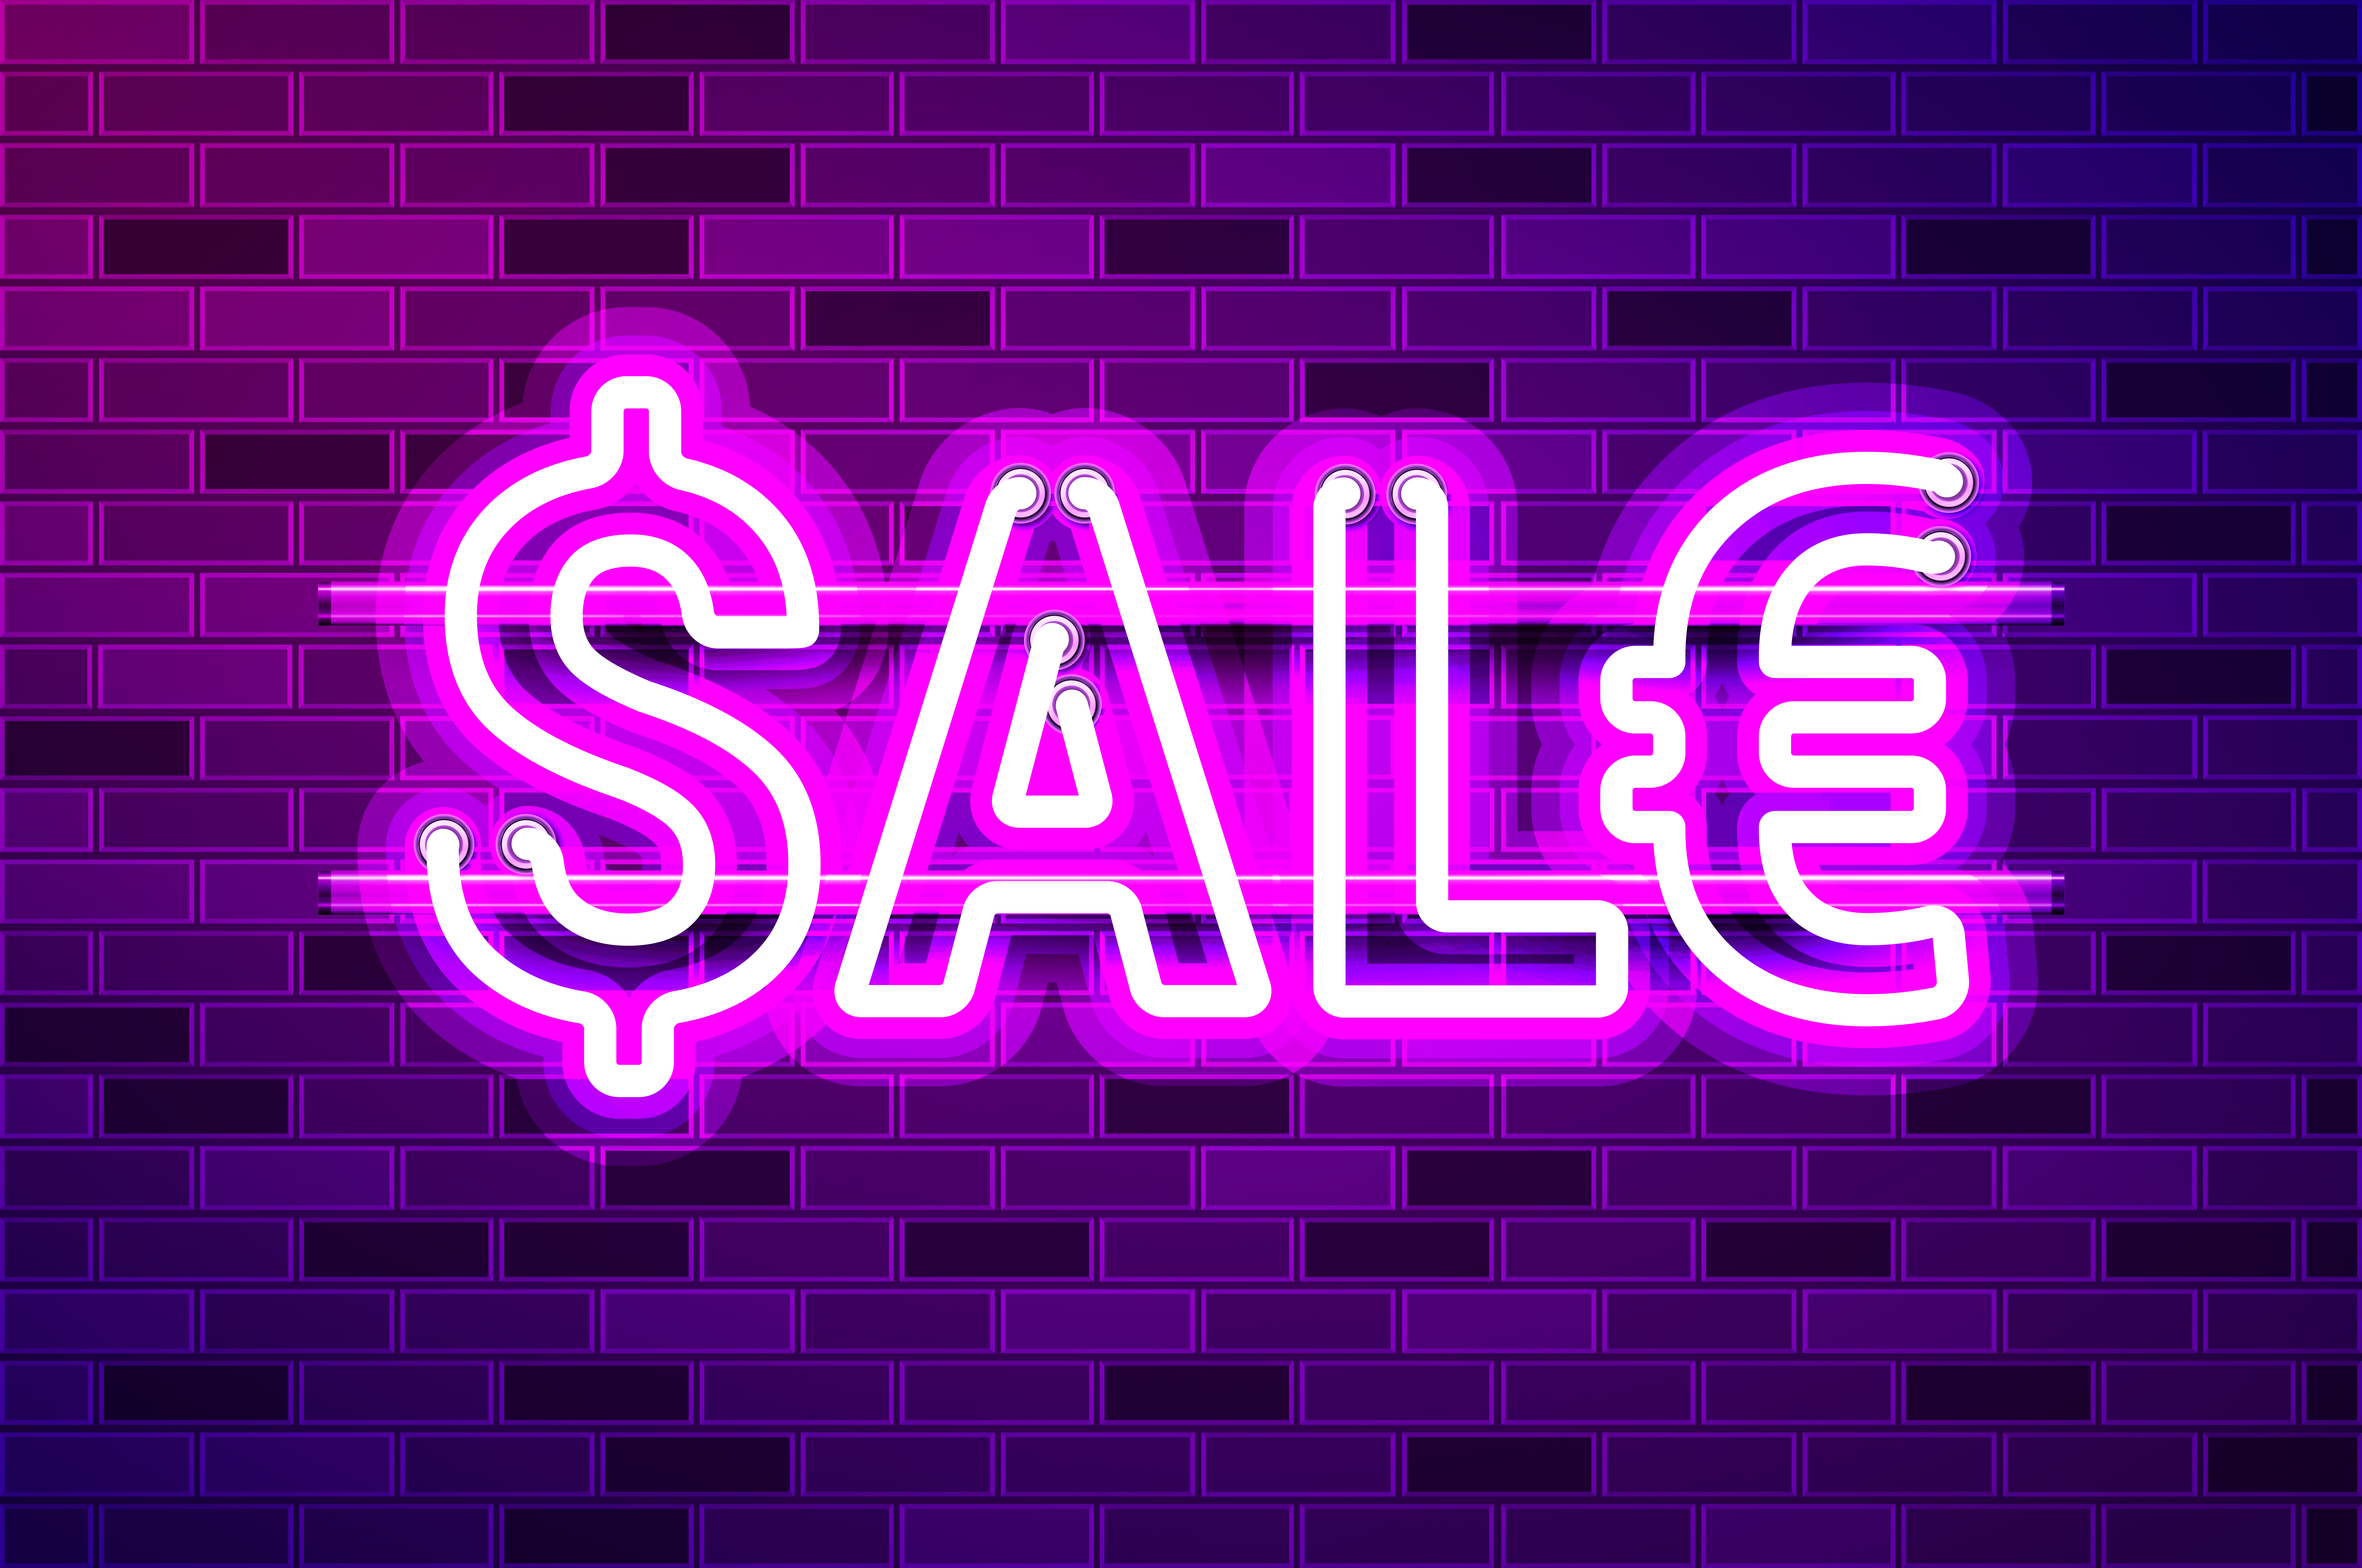 SALE text with dollar and euro signs glowing neon lamp sign. Realistic vector illustration. Purple brick wall, violet glow, metal holders.. SALE text with dollar and euro signs glowing purple neon lamp sign